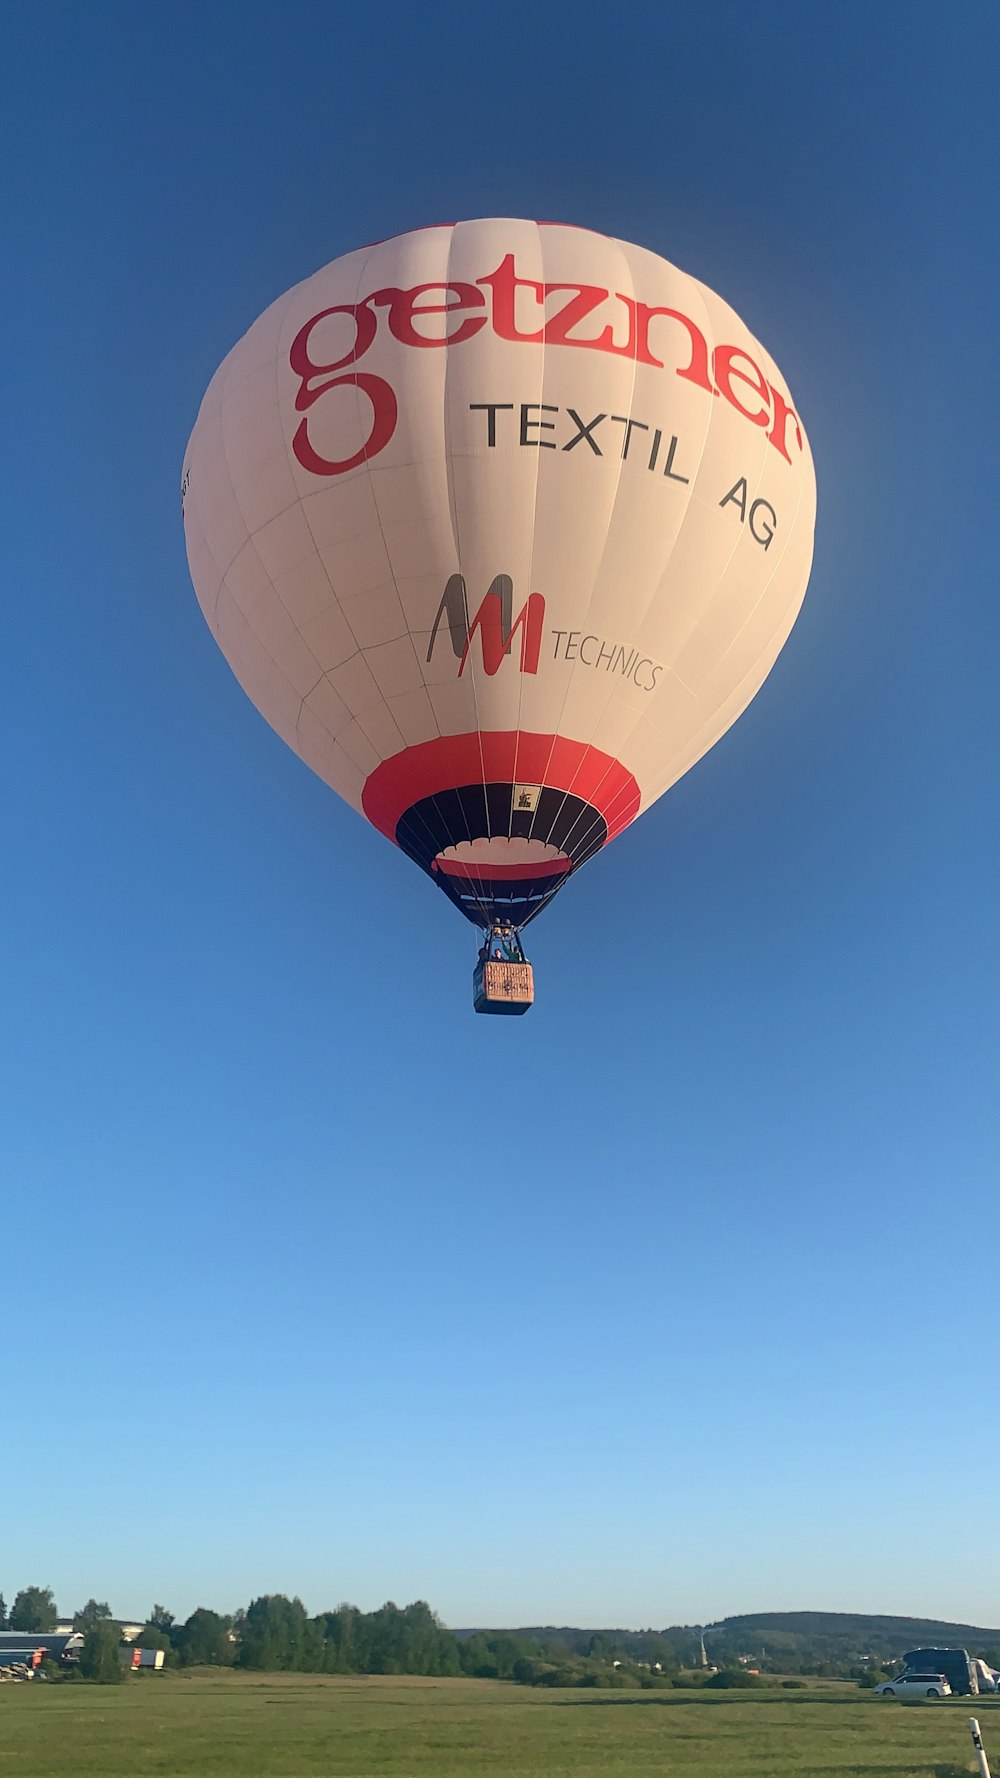 red and white hot air balloon in mid air under blue sky during daytime